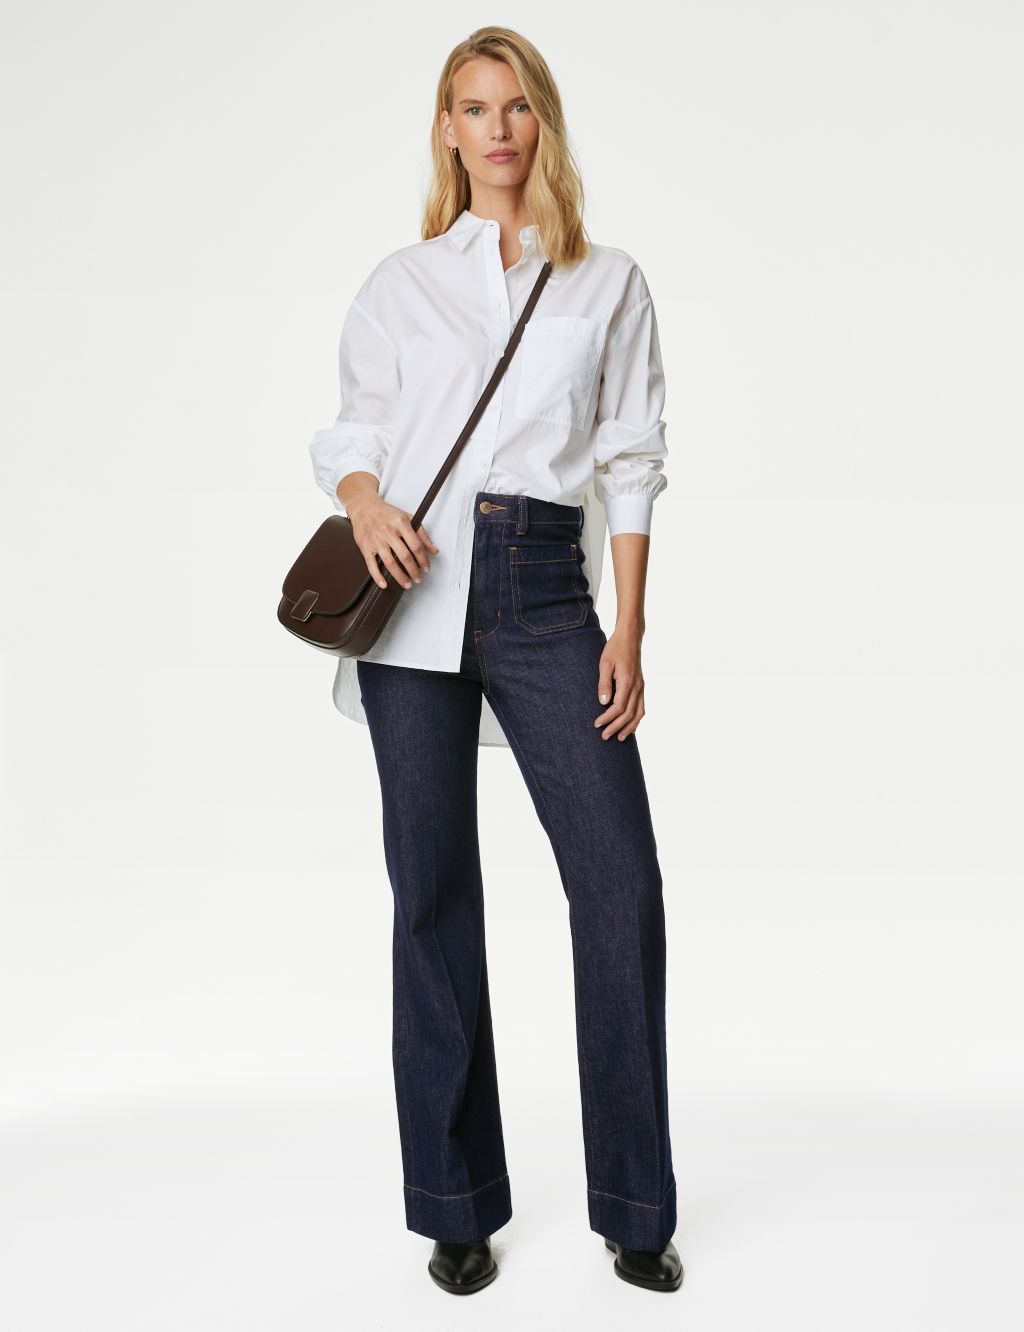 Patch Pocket Flare High Waisted Jeans image 2